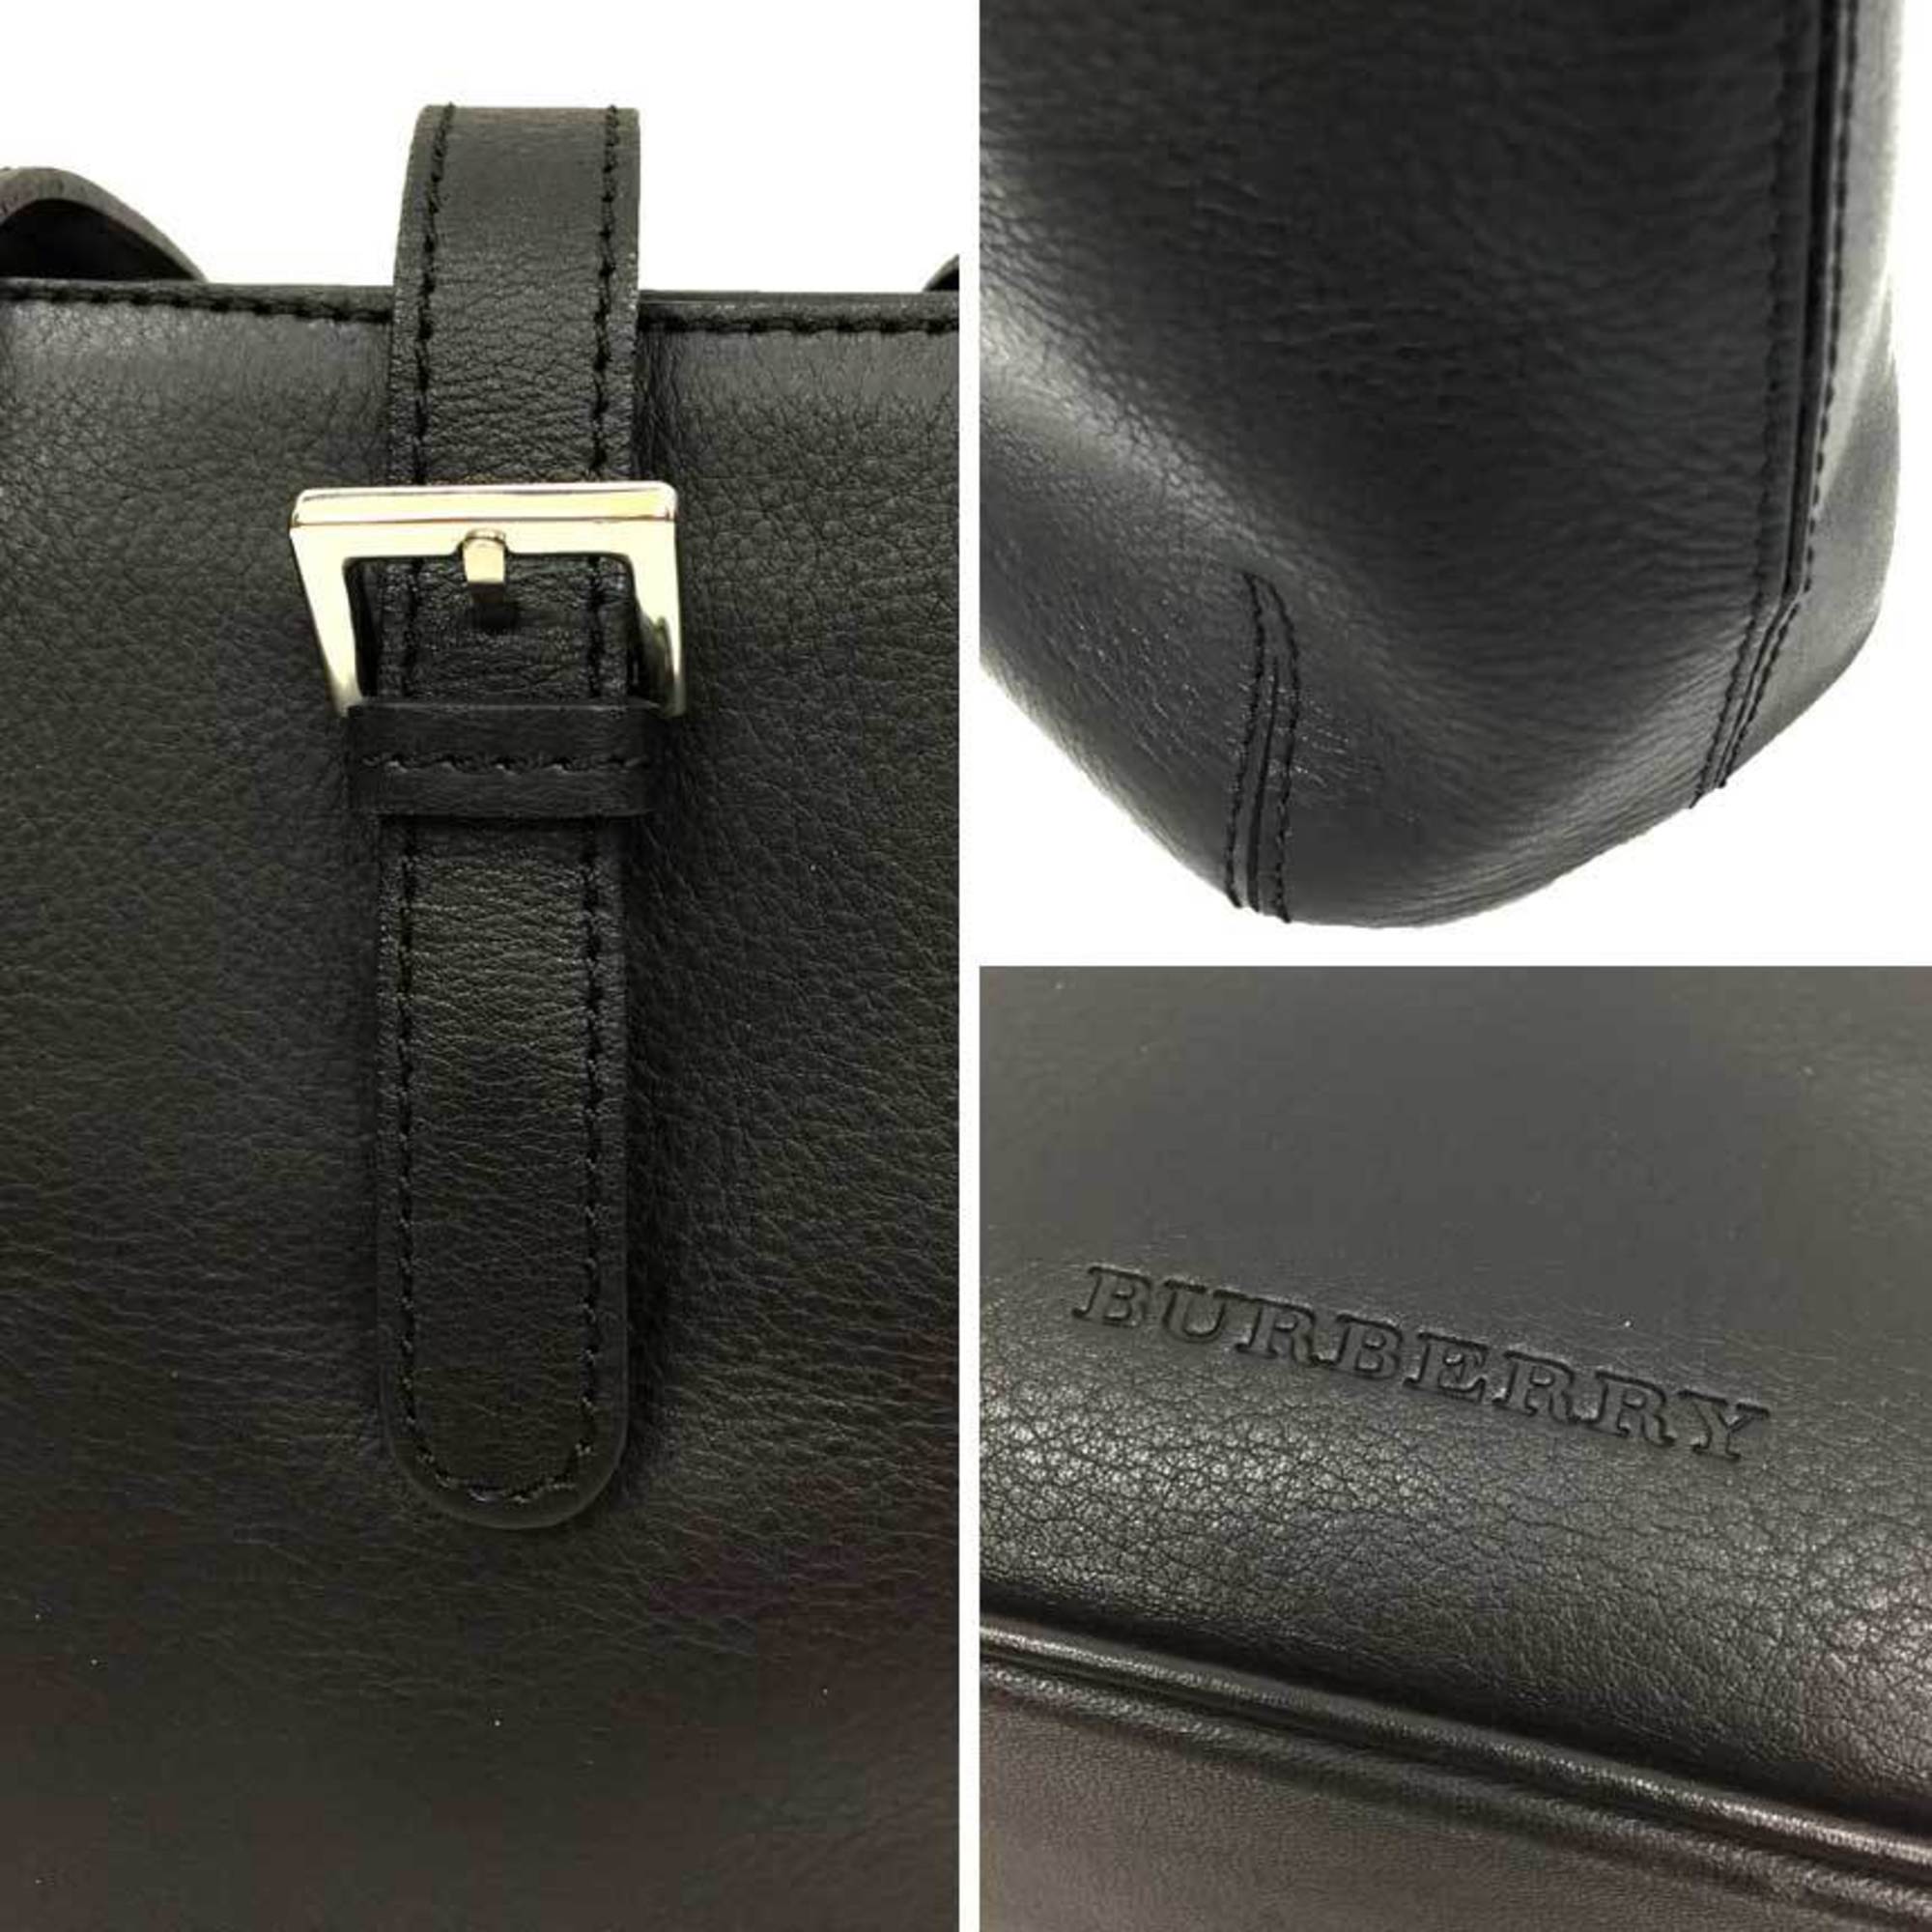 Burberry BURBERRY Tote Bag Leather Black Women's aq9083